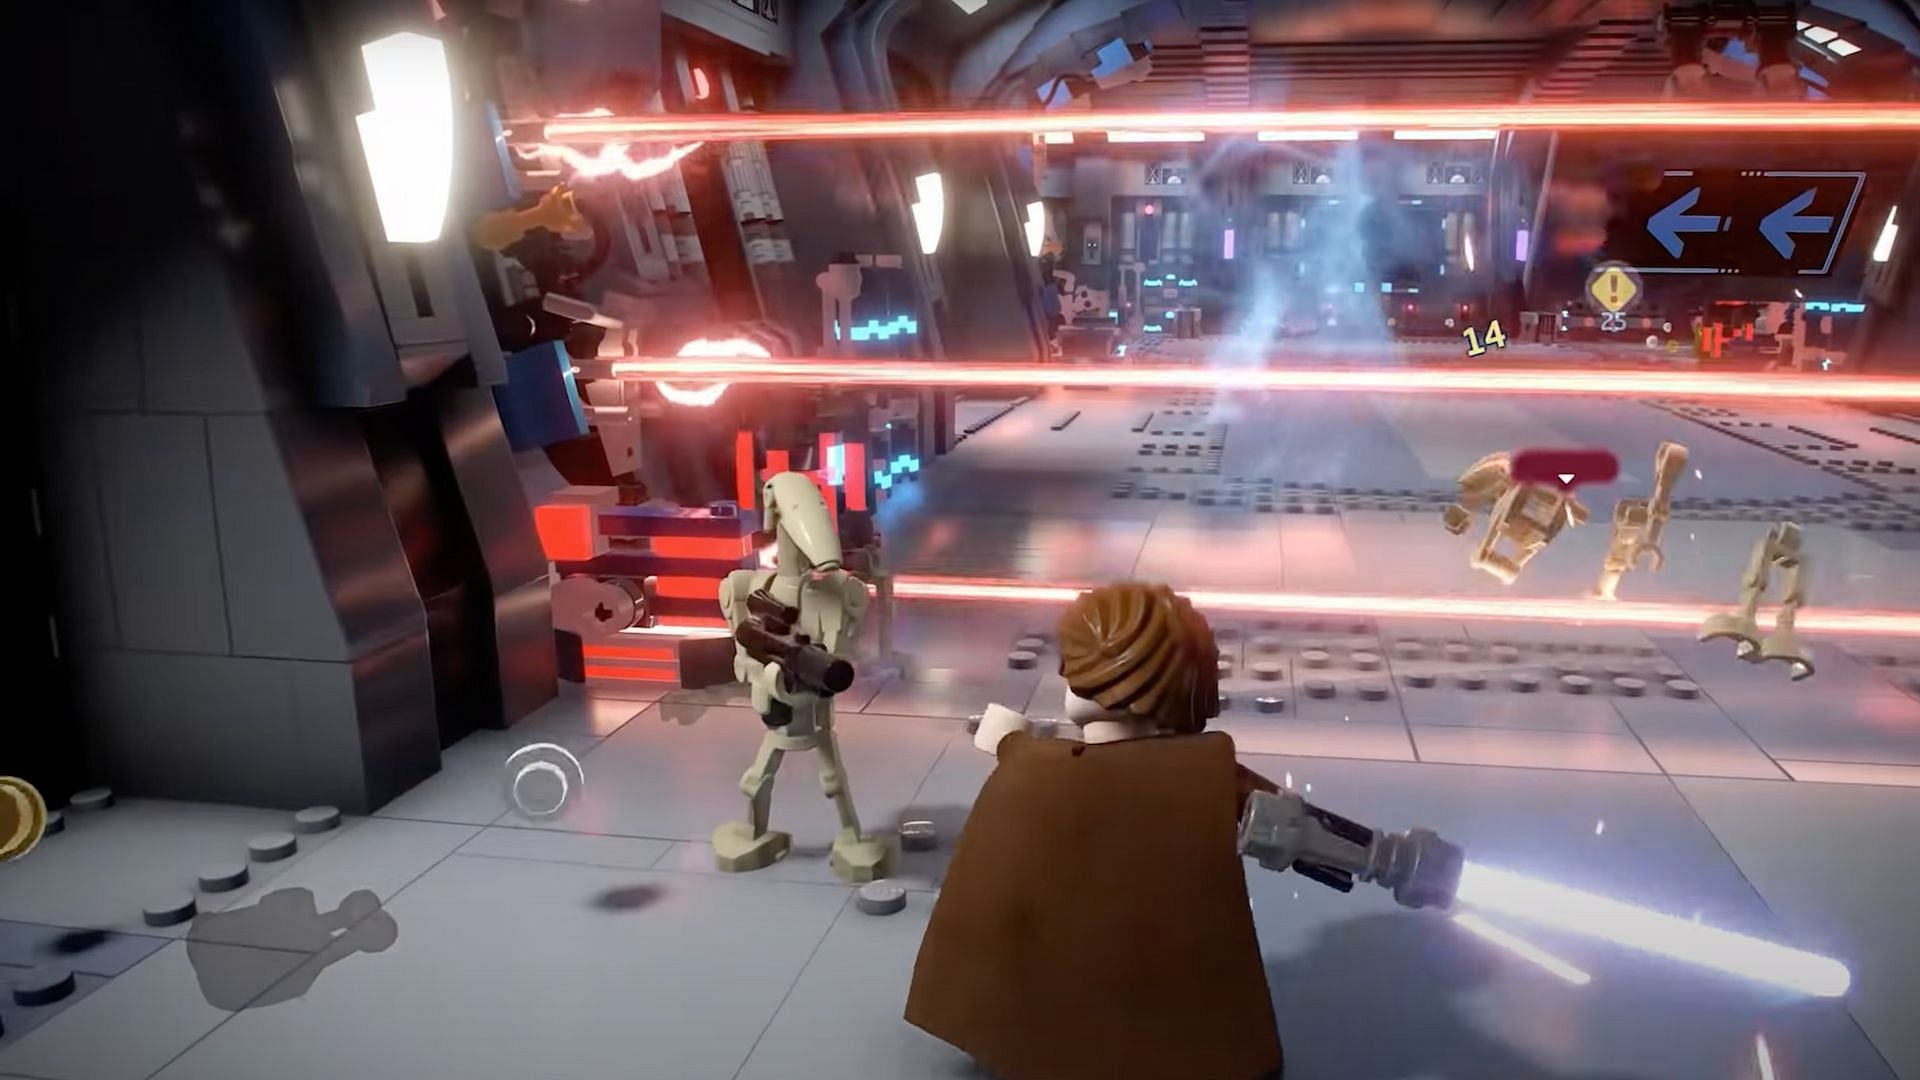 Players of Lego Star Wars: The Skywalker Saga will be able to locate the officer on the west side of the Senate building (Image via Warner Brothers)